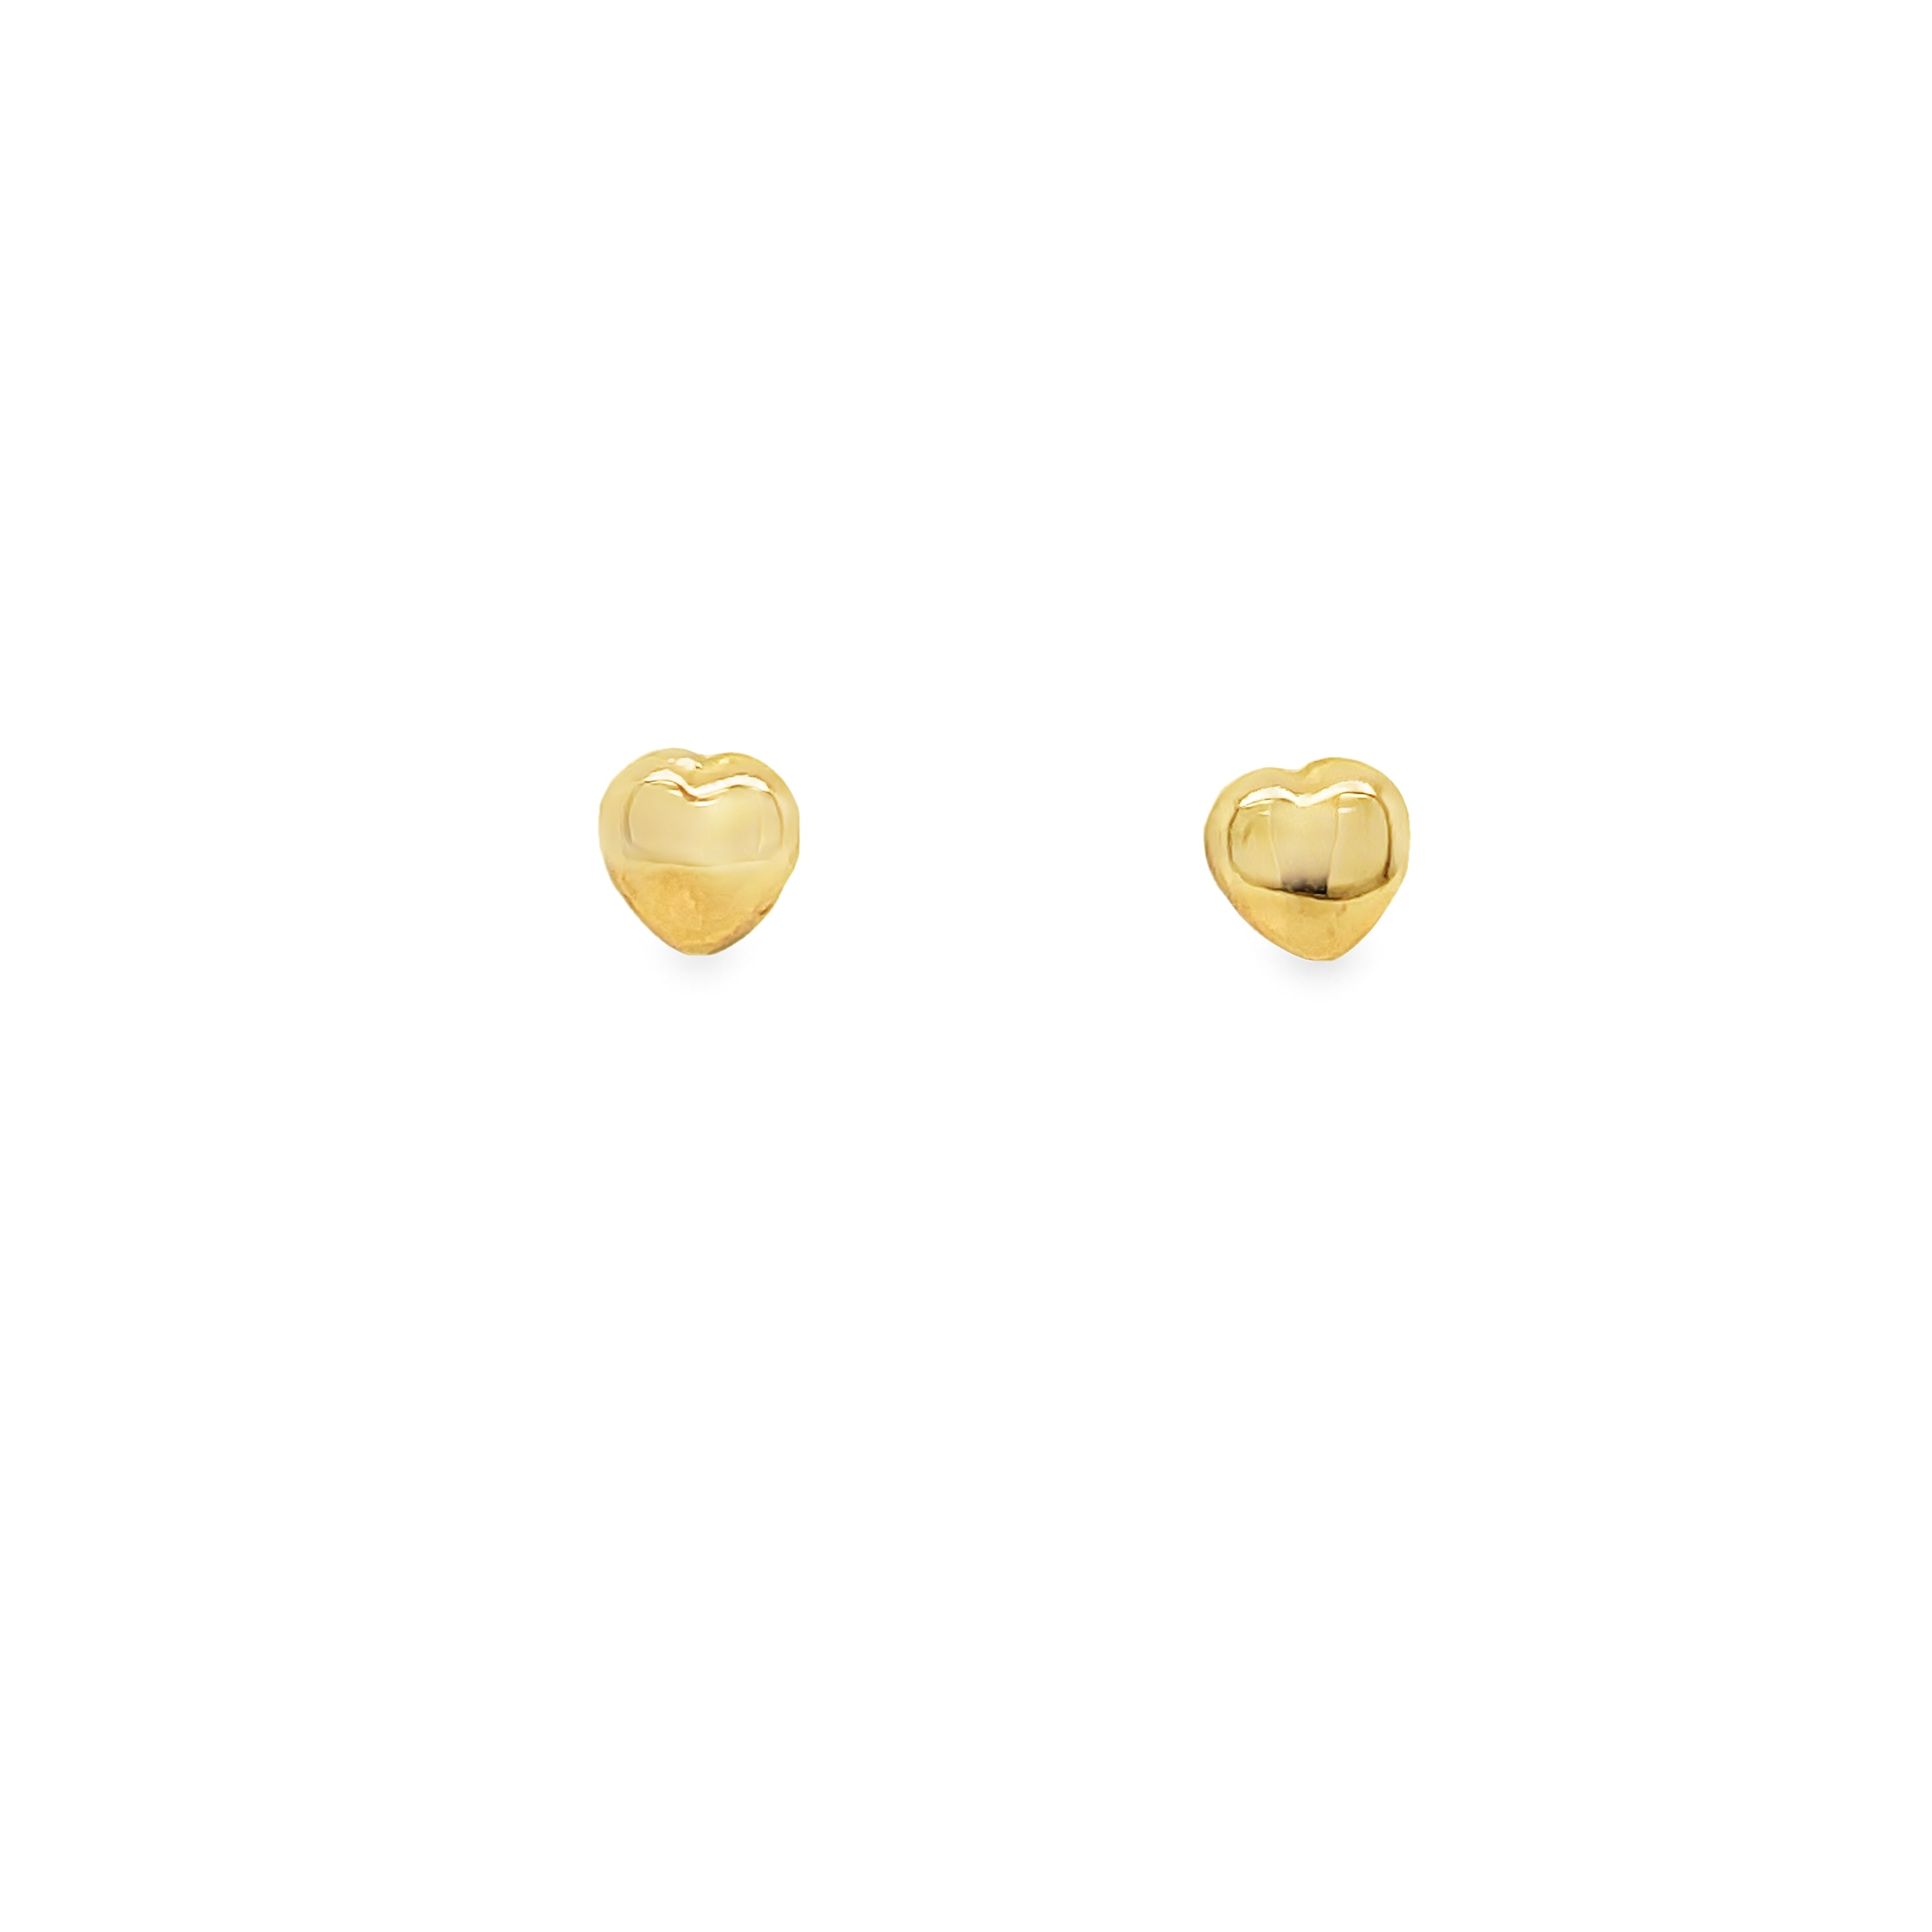 <p><span style="font-size: 0.875rem;">Delicate 14K yellow gold tiny heart shape Baby Earrings with secure baby backs. Expertly crafted for optimal comfort and beauty.</span></p> <p>&nbsp;</p>